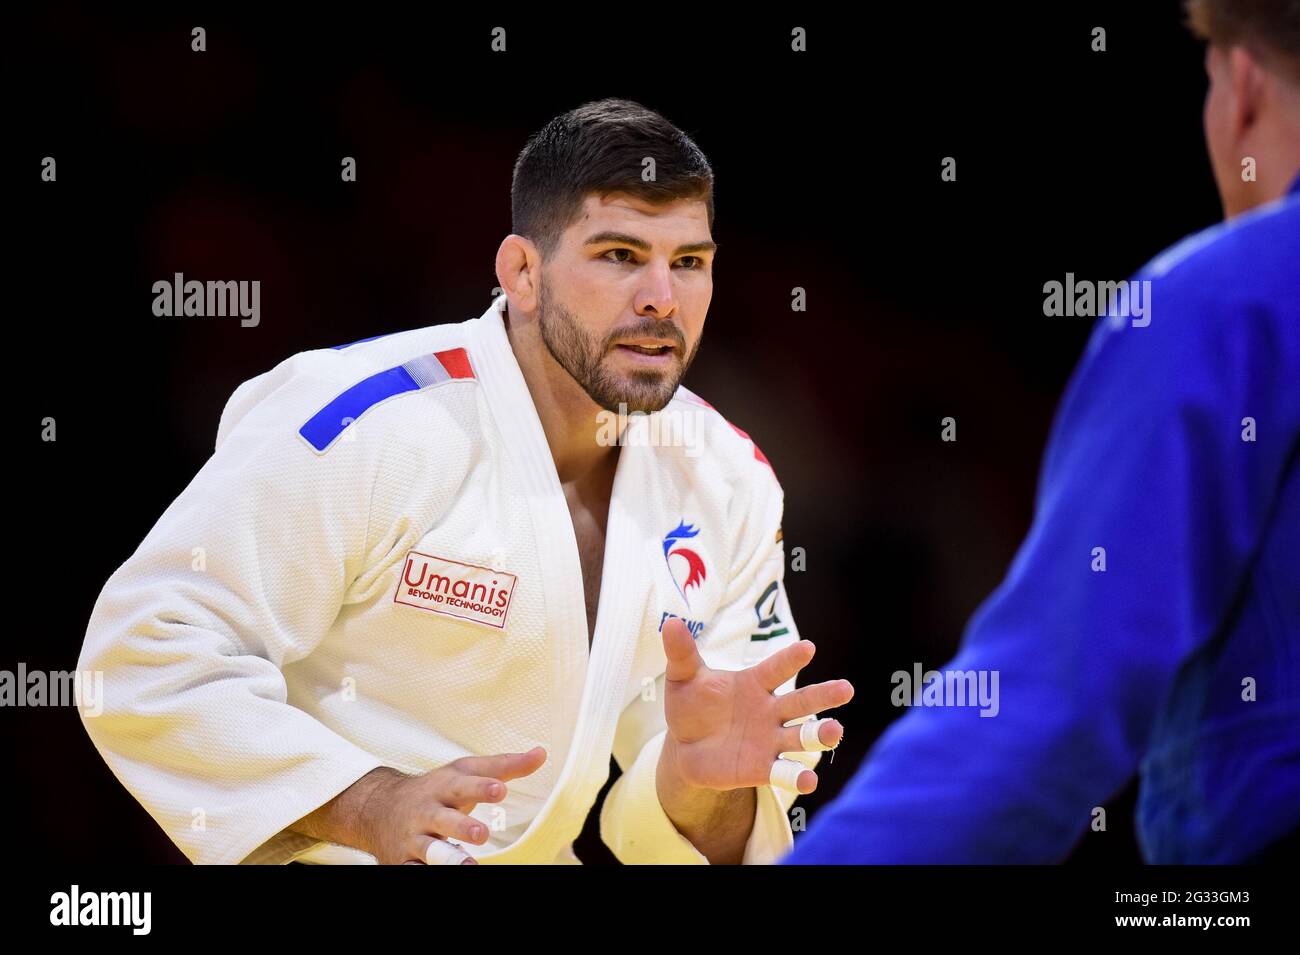 BUDAPEST, HUNGARY - JUNE 13: Cyrille Maret of France during the World Judo Championships Hungary 2021 at Papp Laszlo Budapest Sports Arena on June 13, 2021 in Budapest, Hungary (Photo by Yannick Verhoeven/Orange Pictures) Credit: Orange Pics BV/Alamy Live News Stock Photo